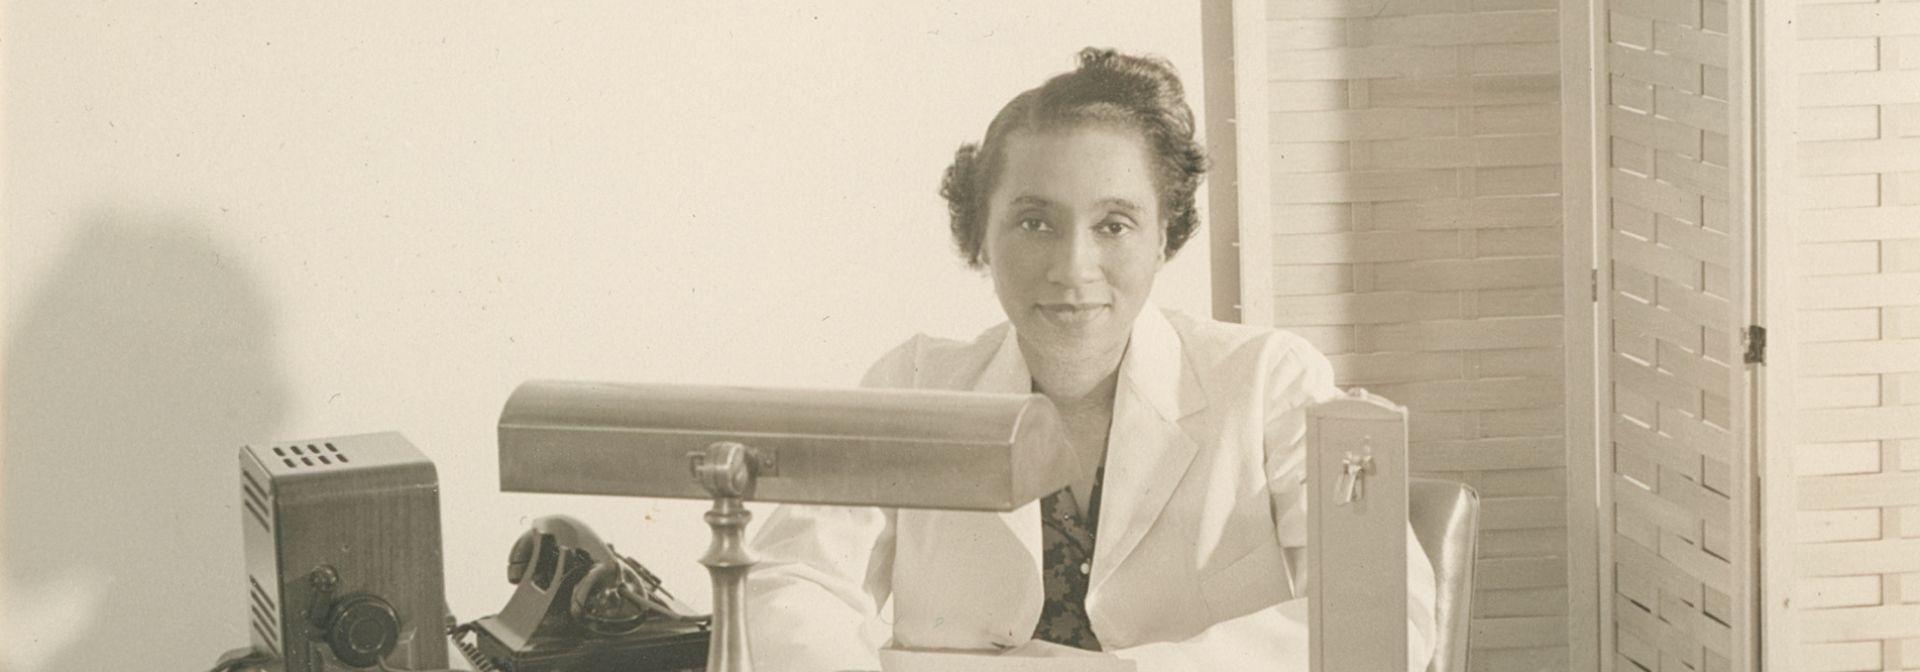 Dr. Helen Dickens at a desk.